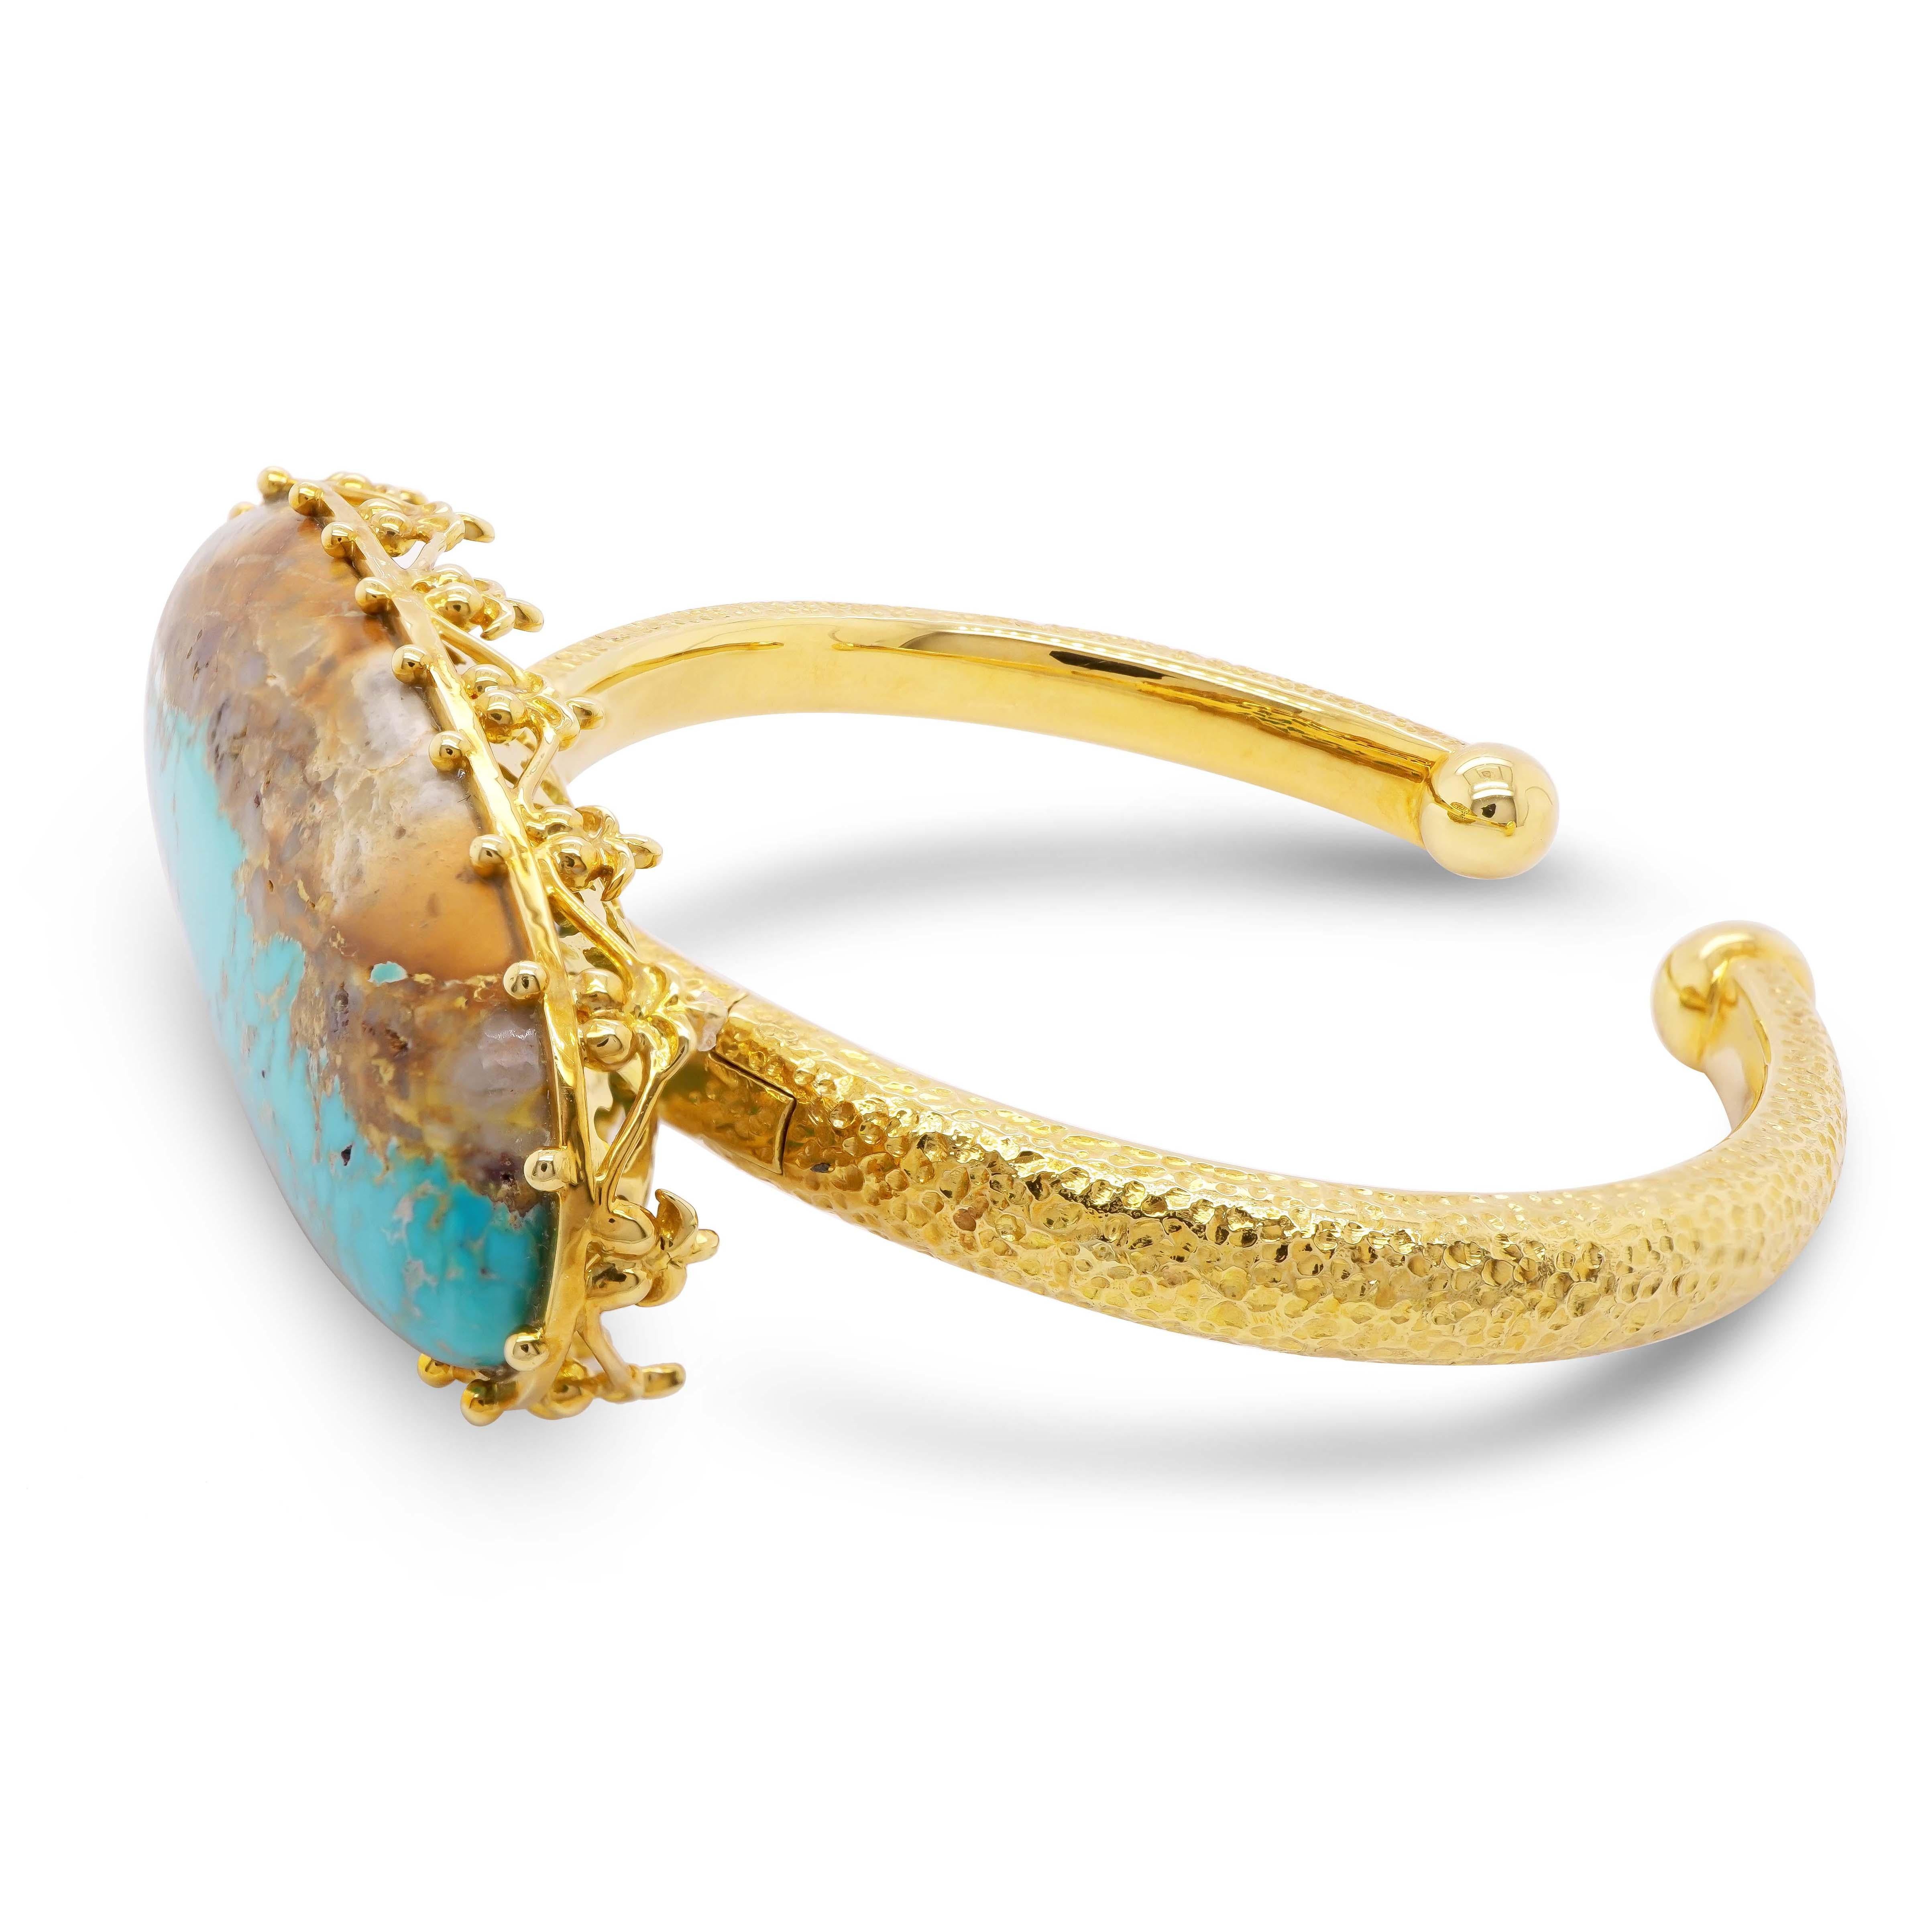 This bangle is handcrafted with a 64.45-carat turquoise gemstone.  Turquoise, to many who are unaware, is primarily a gemstone, although it is now most commonly referred to as the color of the sea or sky.  It is a gemstone that has been for jewelry